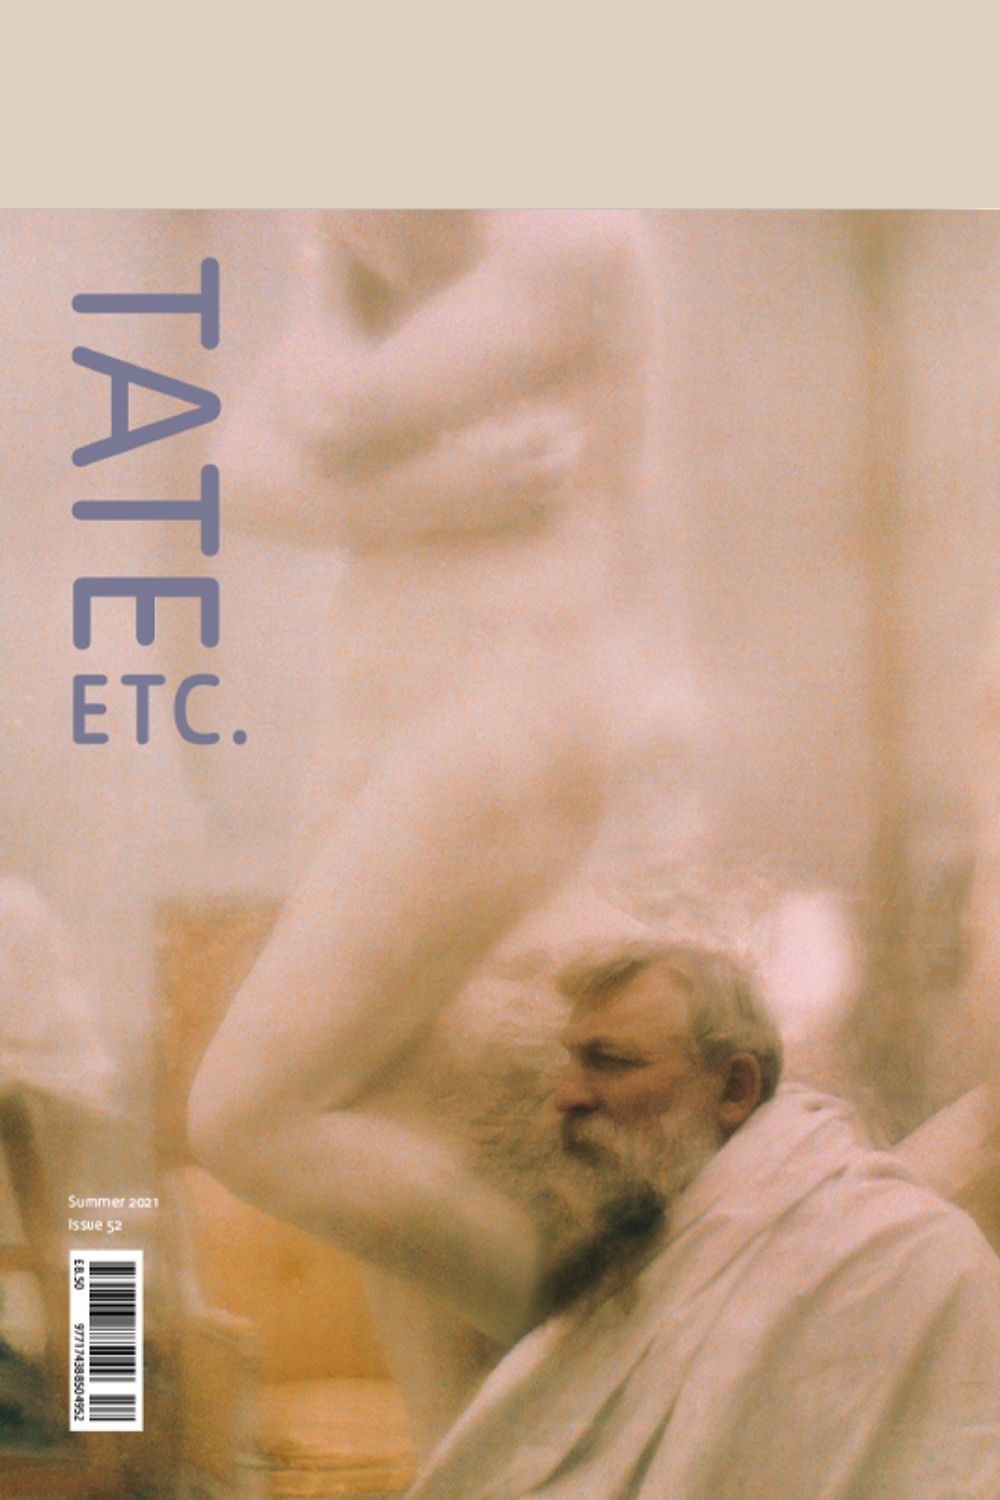 Front cover of Tate Etc. magazine Issue 52